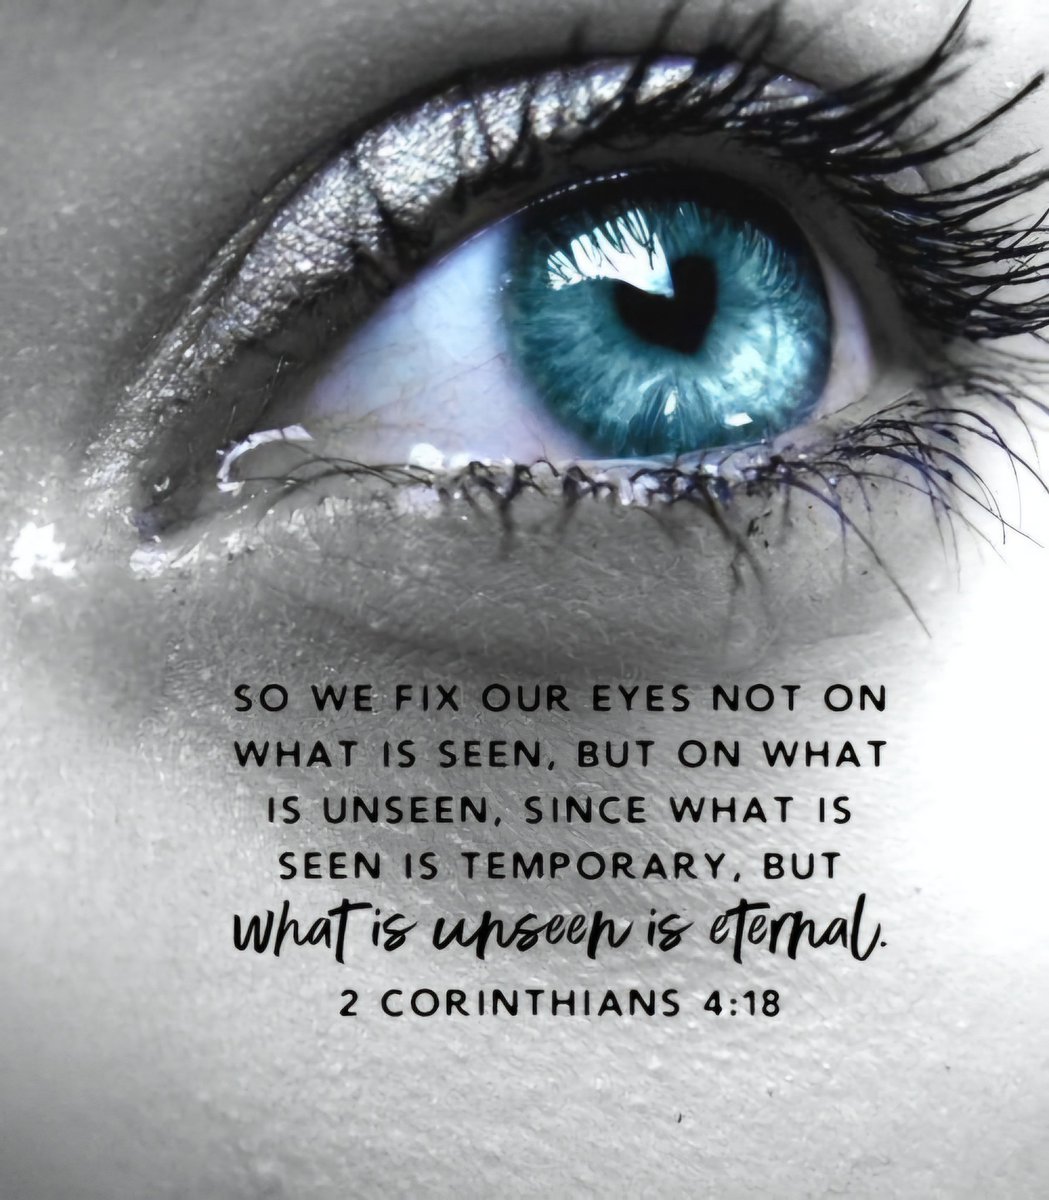 'While we look not at the things which are seen, but at the things which are not seen: for the things which are seen are temporal; but the things which are not seen are eternal.' - 2 Corinthians 4:18 'For we walk by faith, not by sight.' - 2 Corinthians 5:7 'Now faith is the…